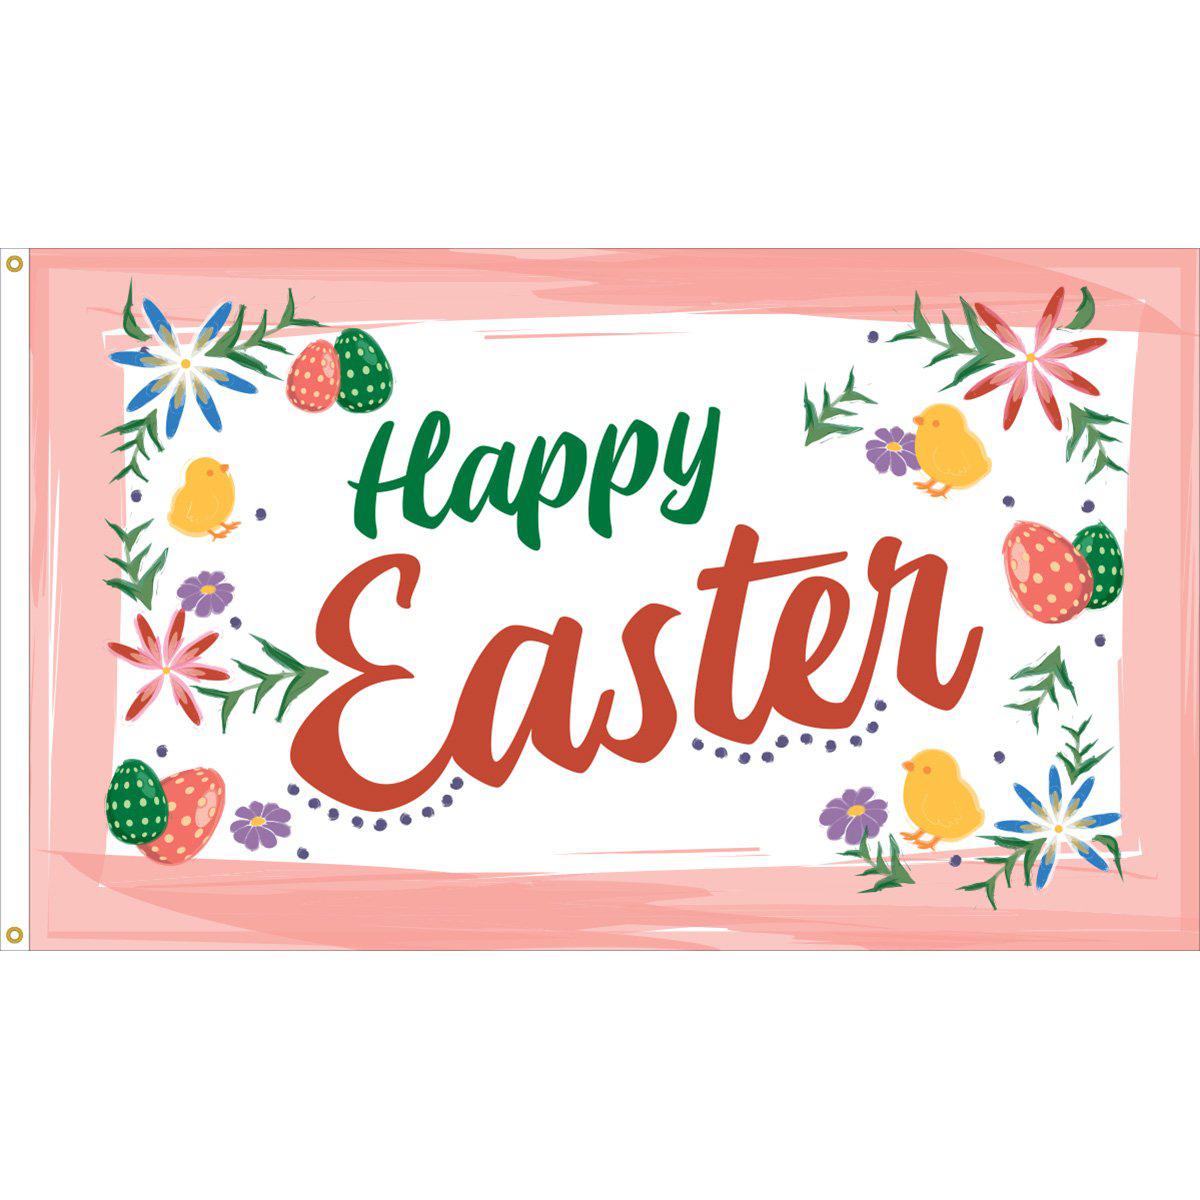 Happy Easter 3' x 5' flag features eggs and flowers with "Happy Easter" message on a pink background.